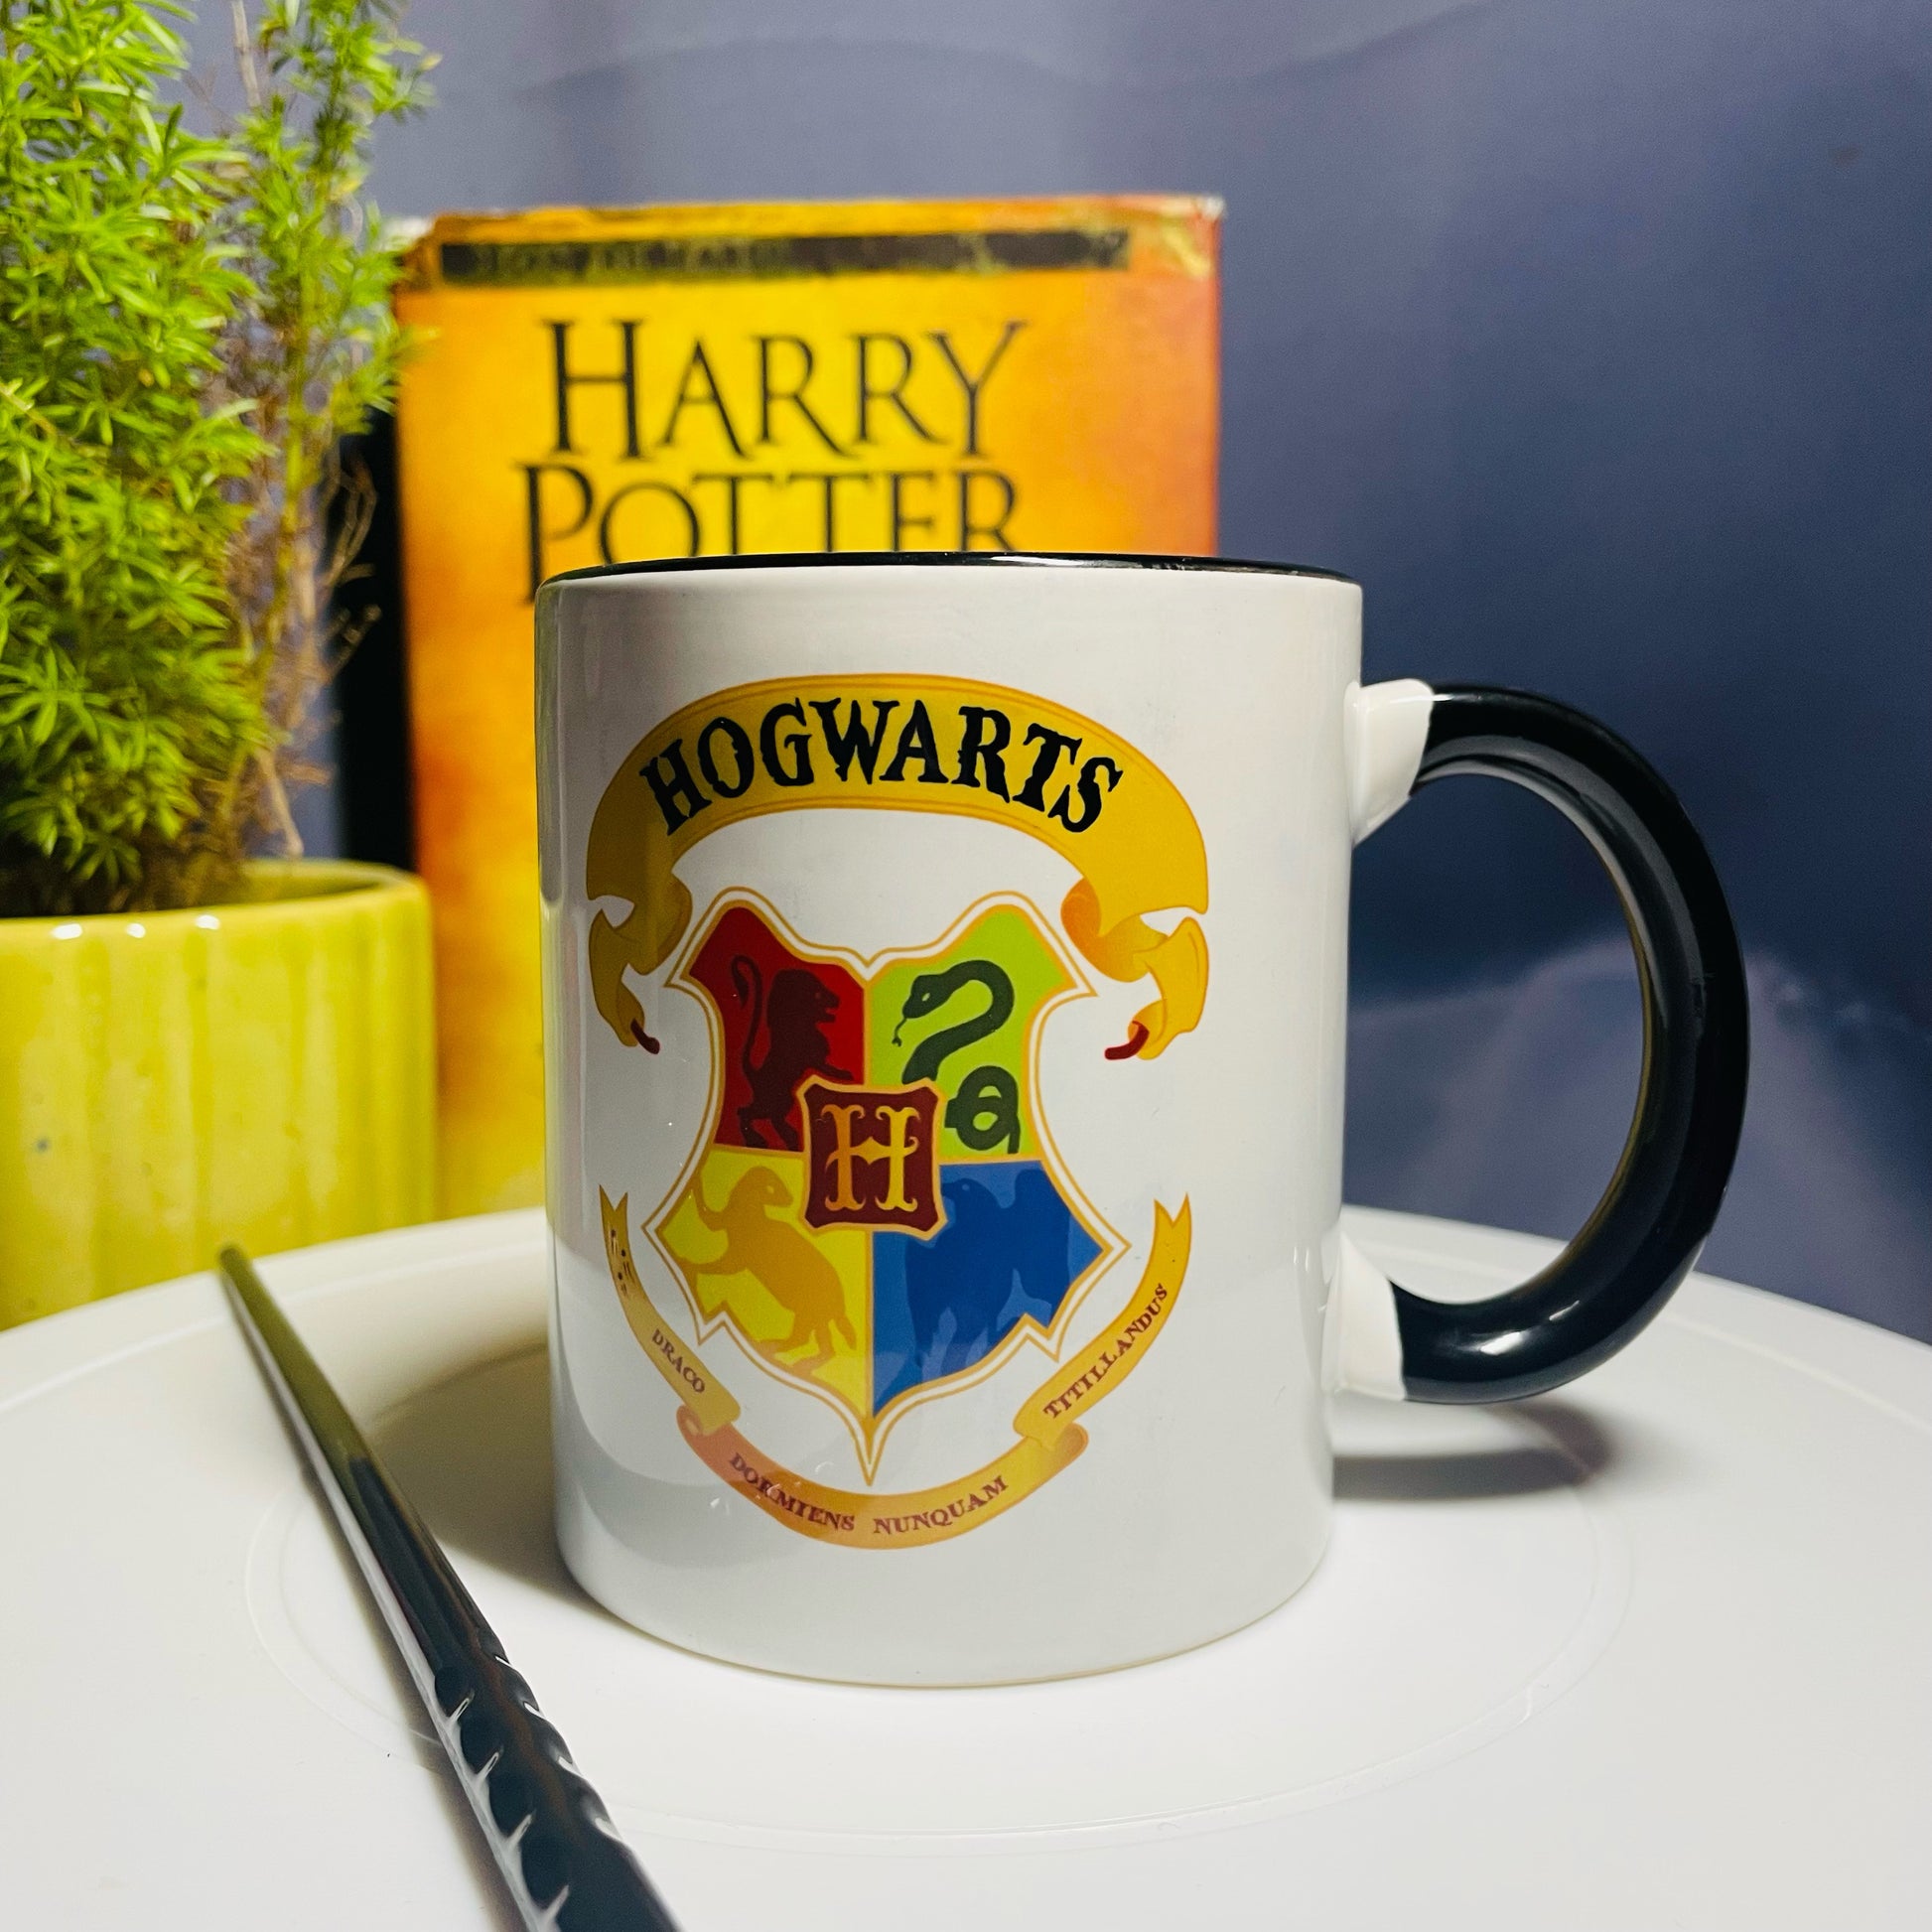 For the love of Harry Potter, Hogwarts & quirky coffee mugs. Makes an excellent gift choice for those in love with the potterworld.